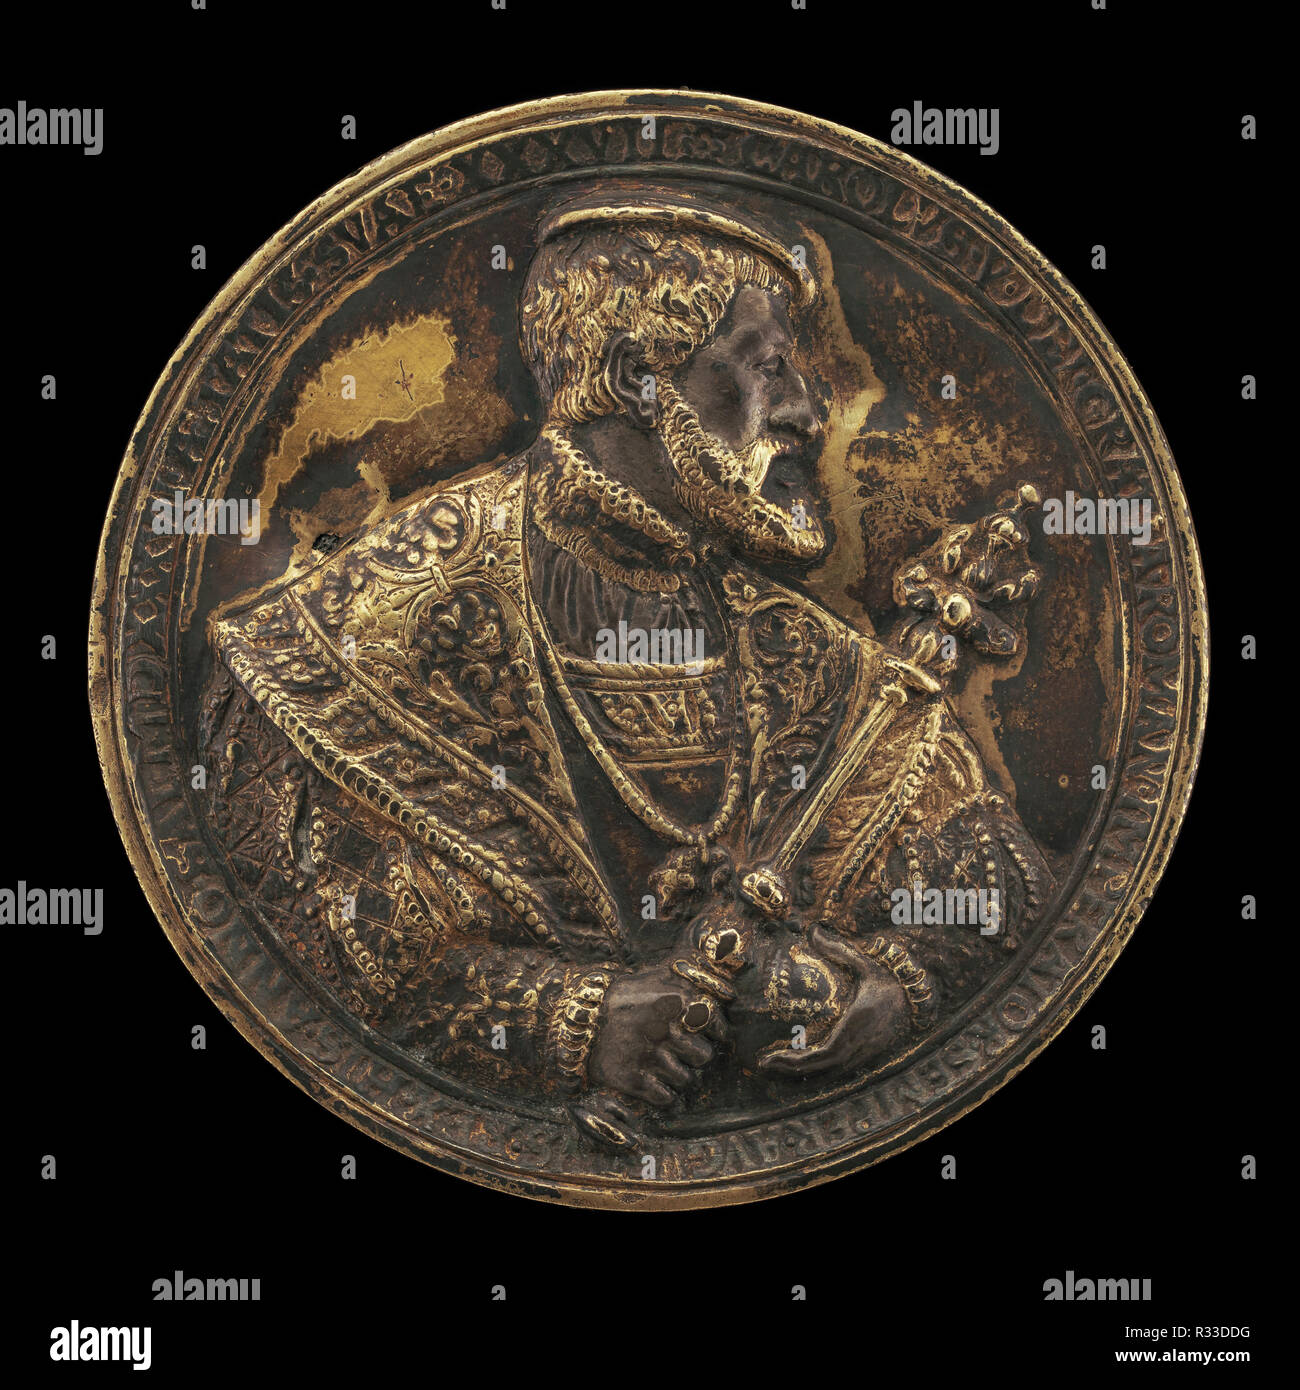 Charles V, 1500-1558, King of Spain 1516-1556, Holy Roman Emperor 1519 [obverse]. Dated: 1537. Dimensions: overall (diameter): 6.72 cm (2 5/8 in.)  gross weight: 72.56 gr (0.16 lb.)  axis: 12:00. Medium: bronze, partially gilded. Museum: National Gallery of Art, Washington DC. Author: Hans Reinhart the Elder. Stock Photo